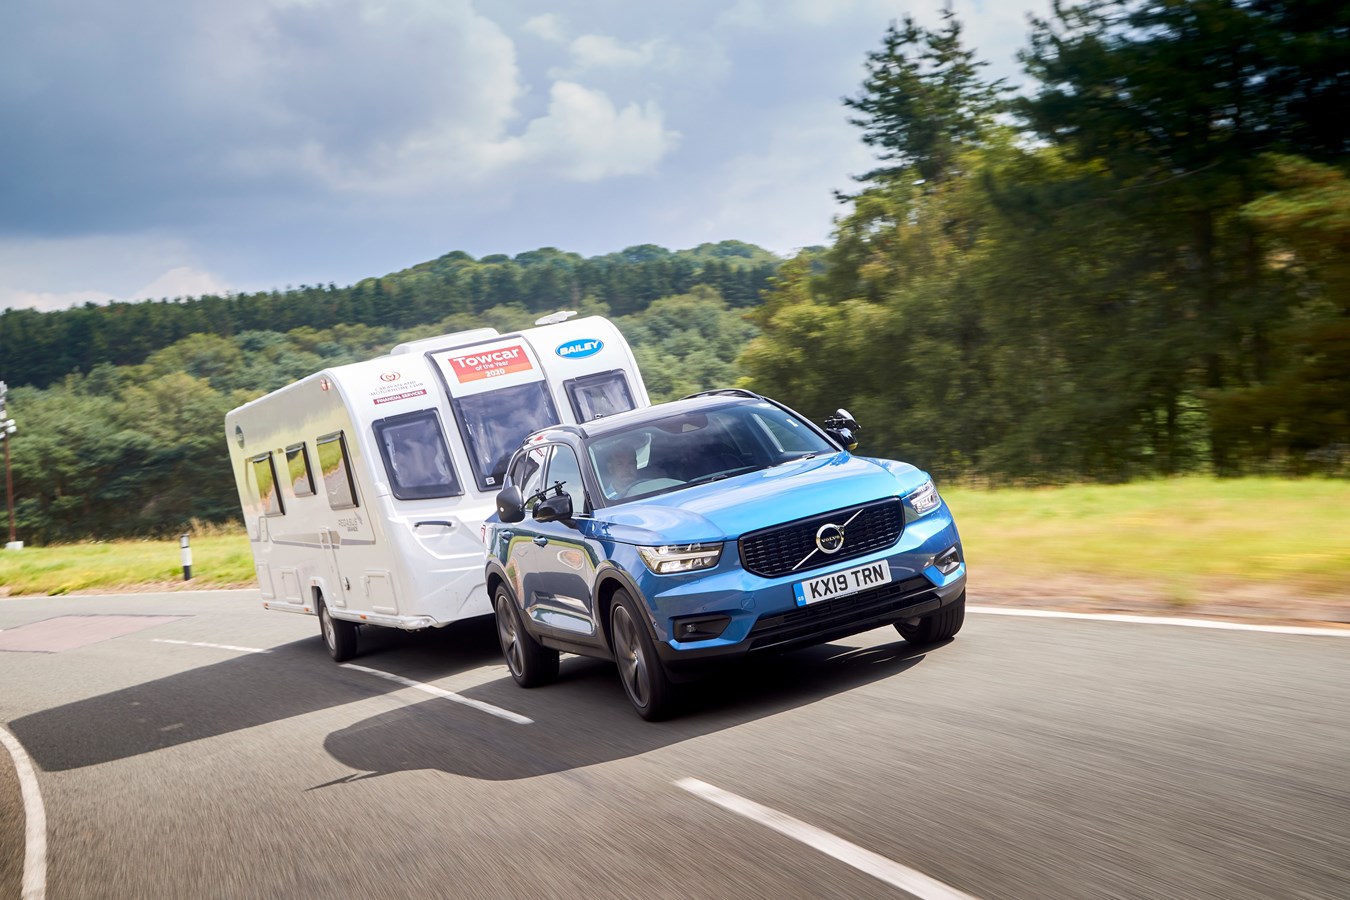 XC40 crowned Towcar of the Year as Volvo enjoys a hat-trick in Caravan and Motorhome Club awards